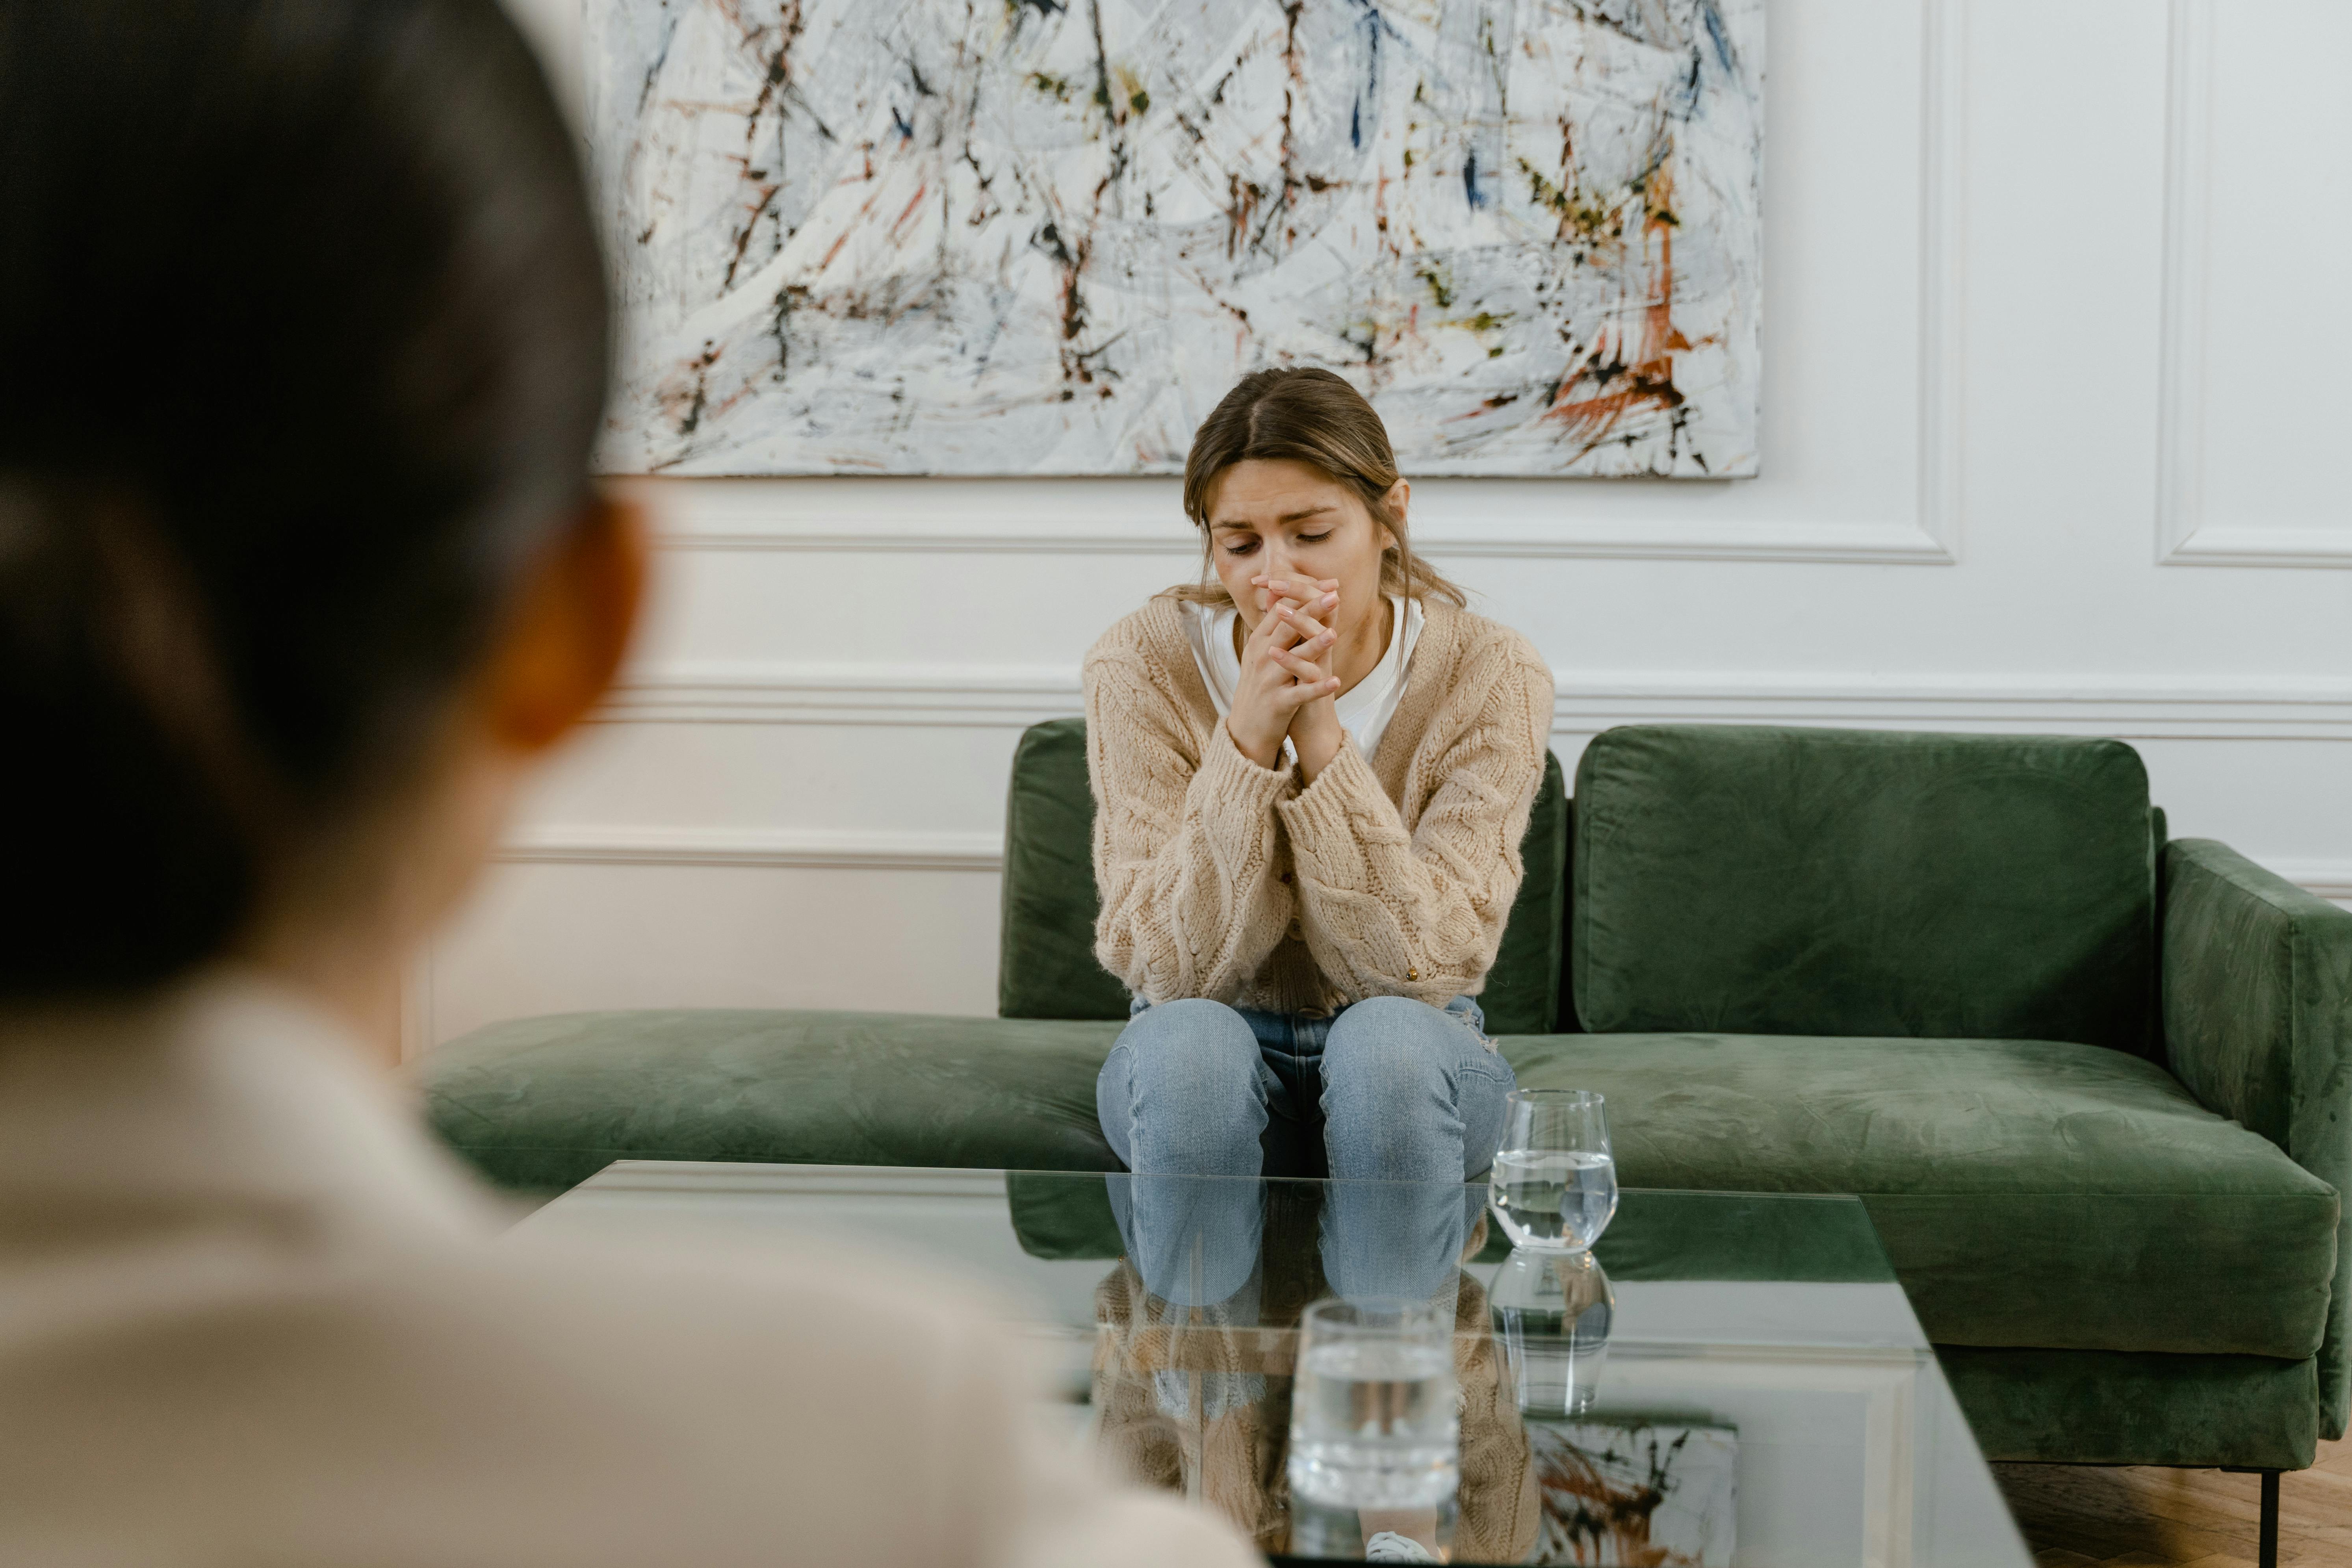 A woman talking to her therapist | Source: Pexels